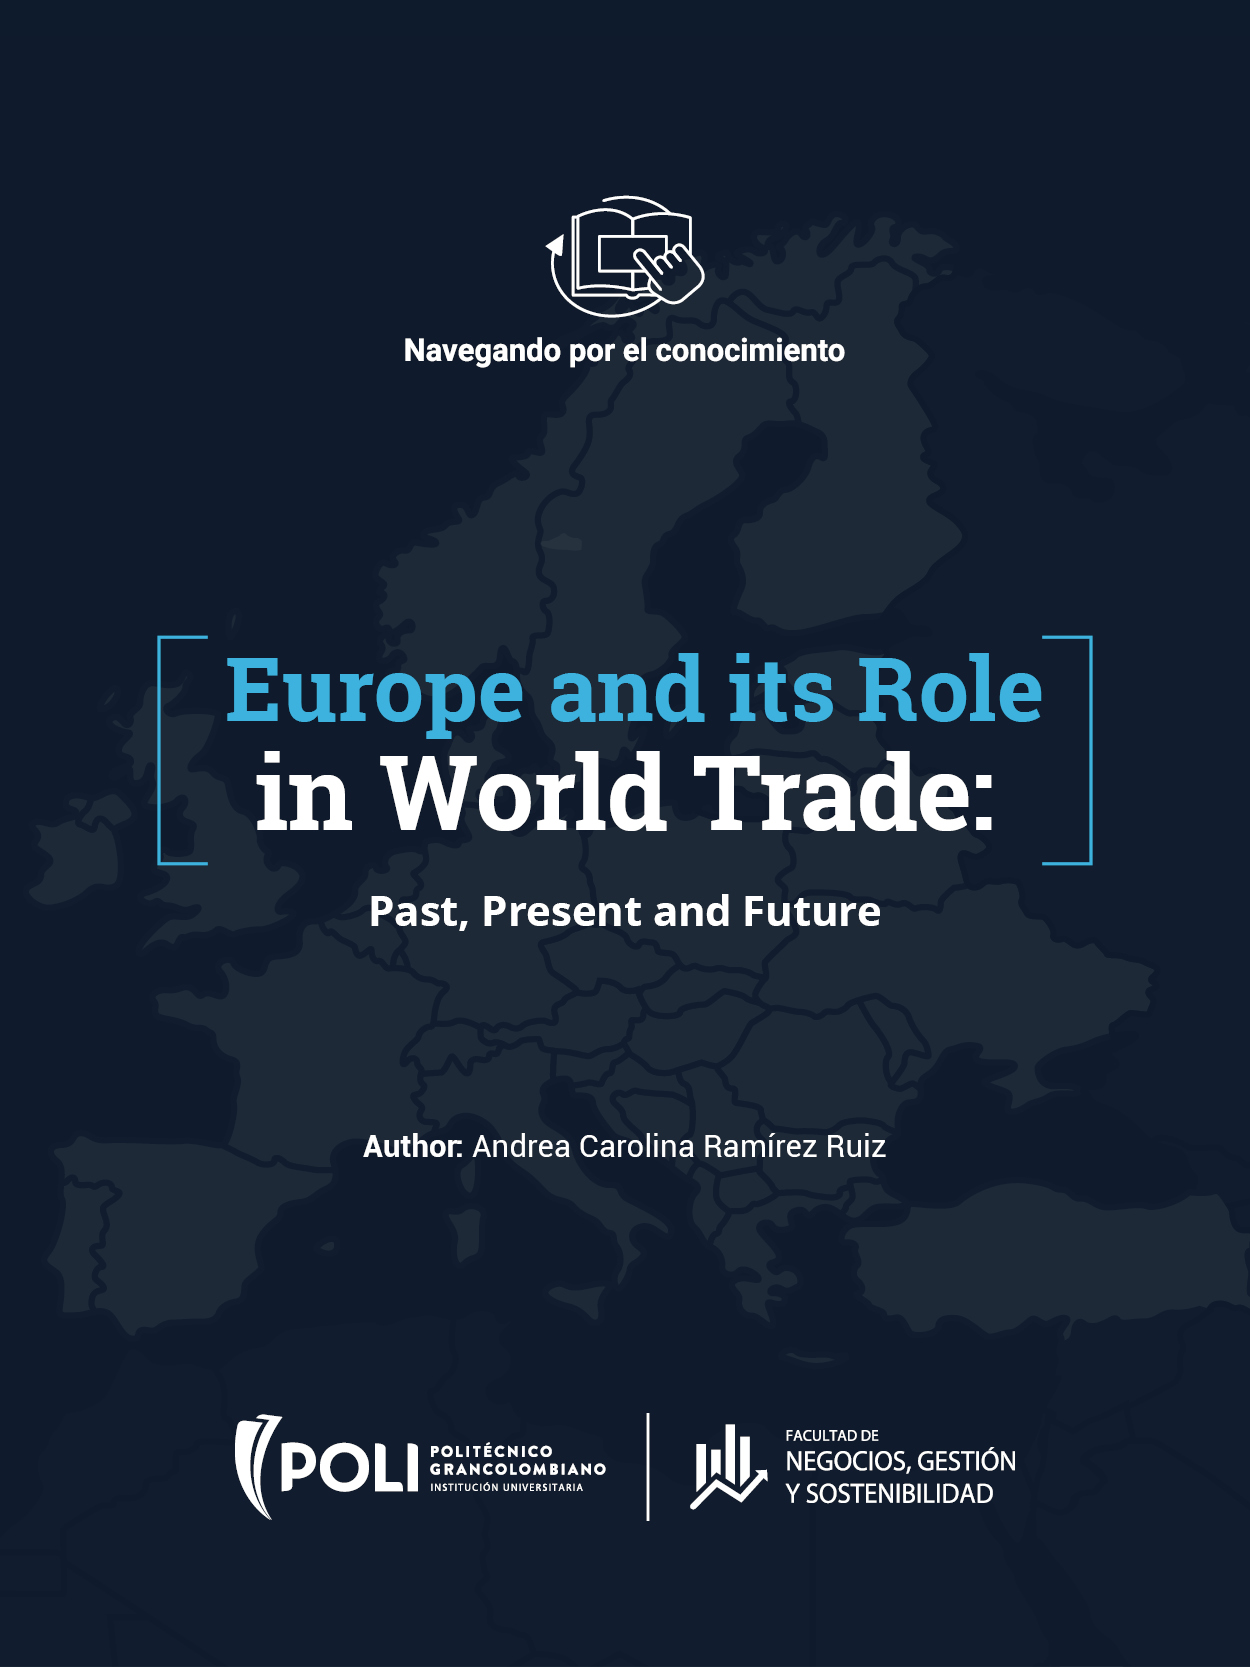 Europe and its role in world trade: Past, Present and Future